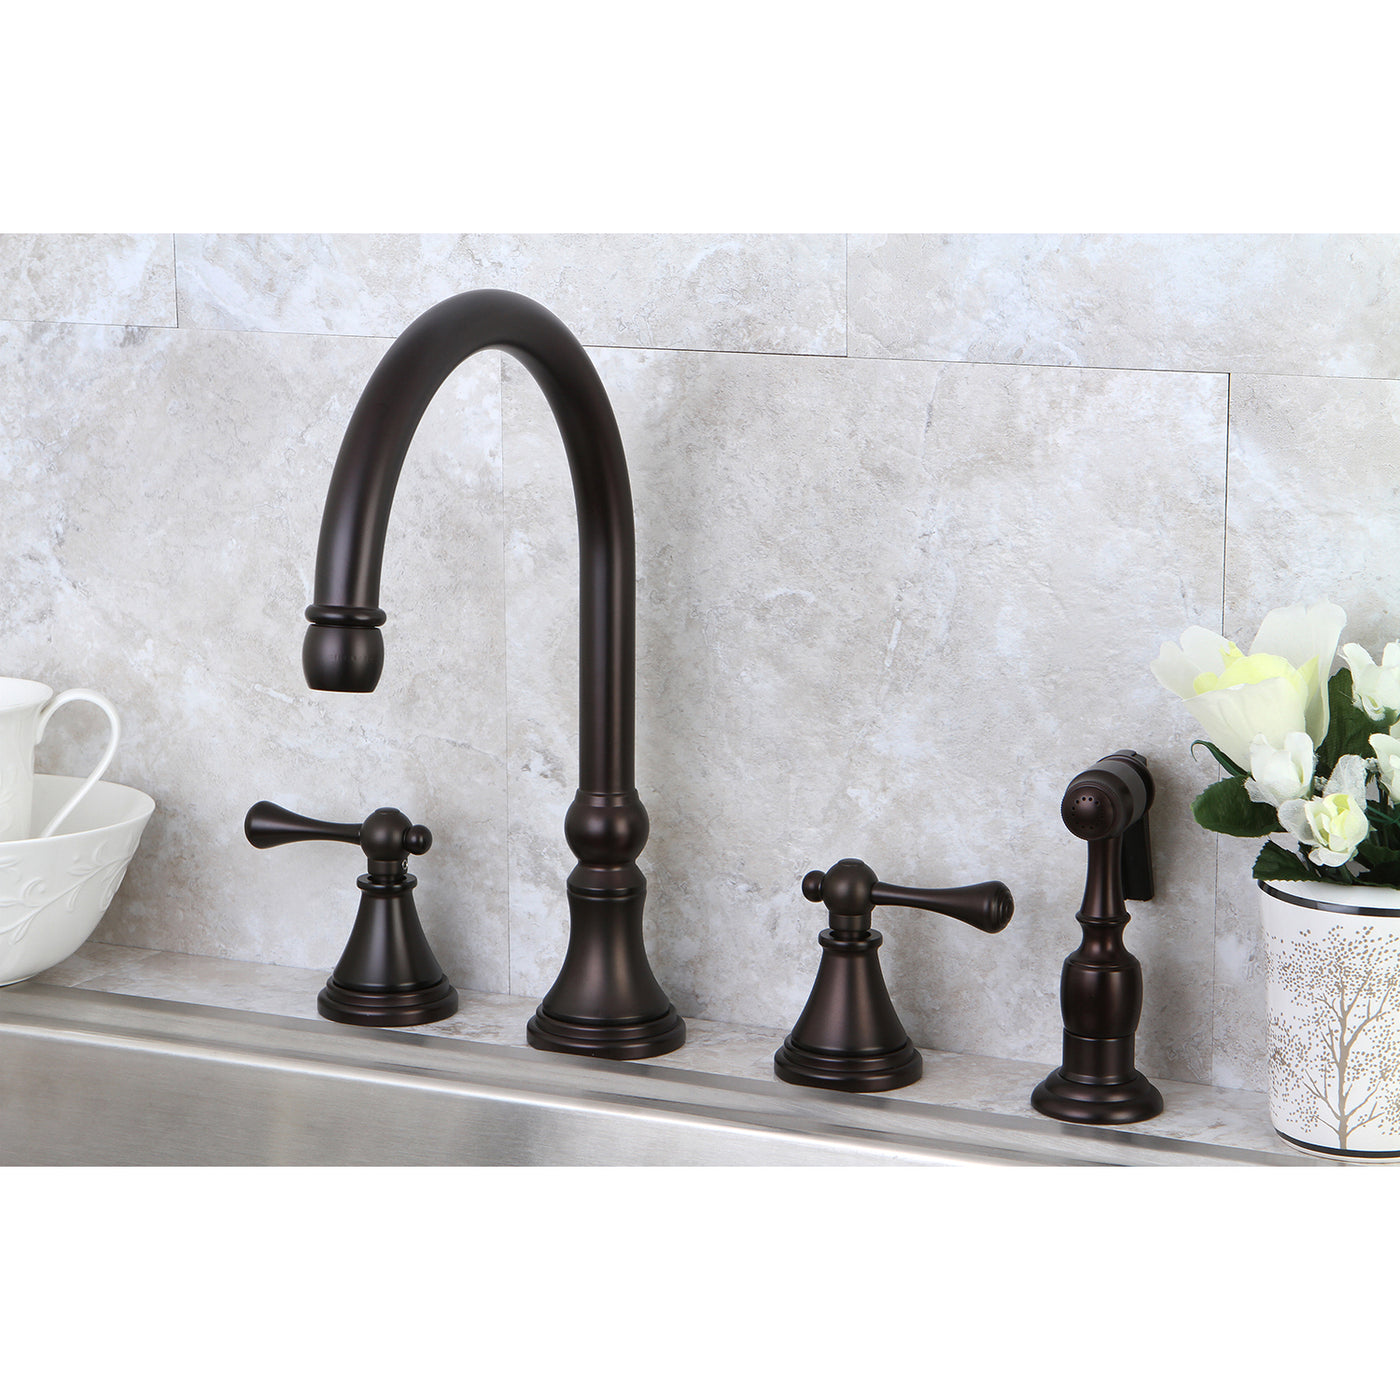 Elements of Design ES2795BLBS Widespread Kitchen Faucet with Brass Sprayer, Oil Rubbed Bronze